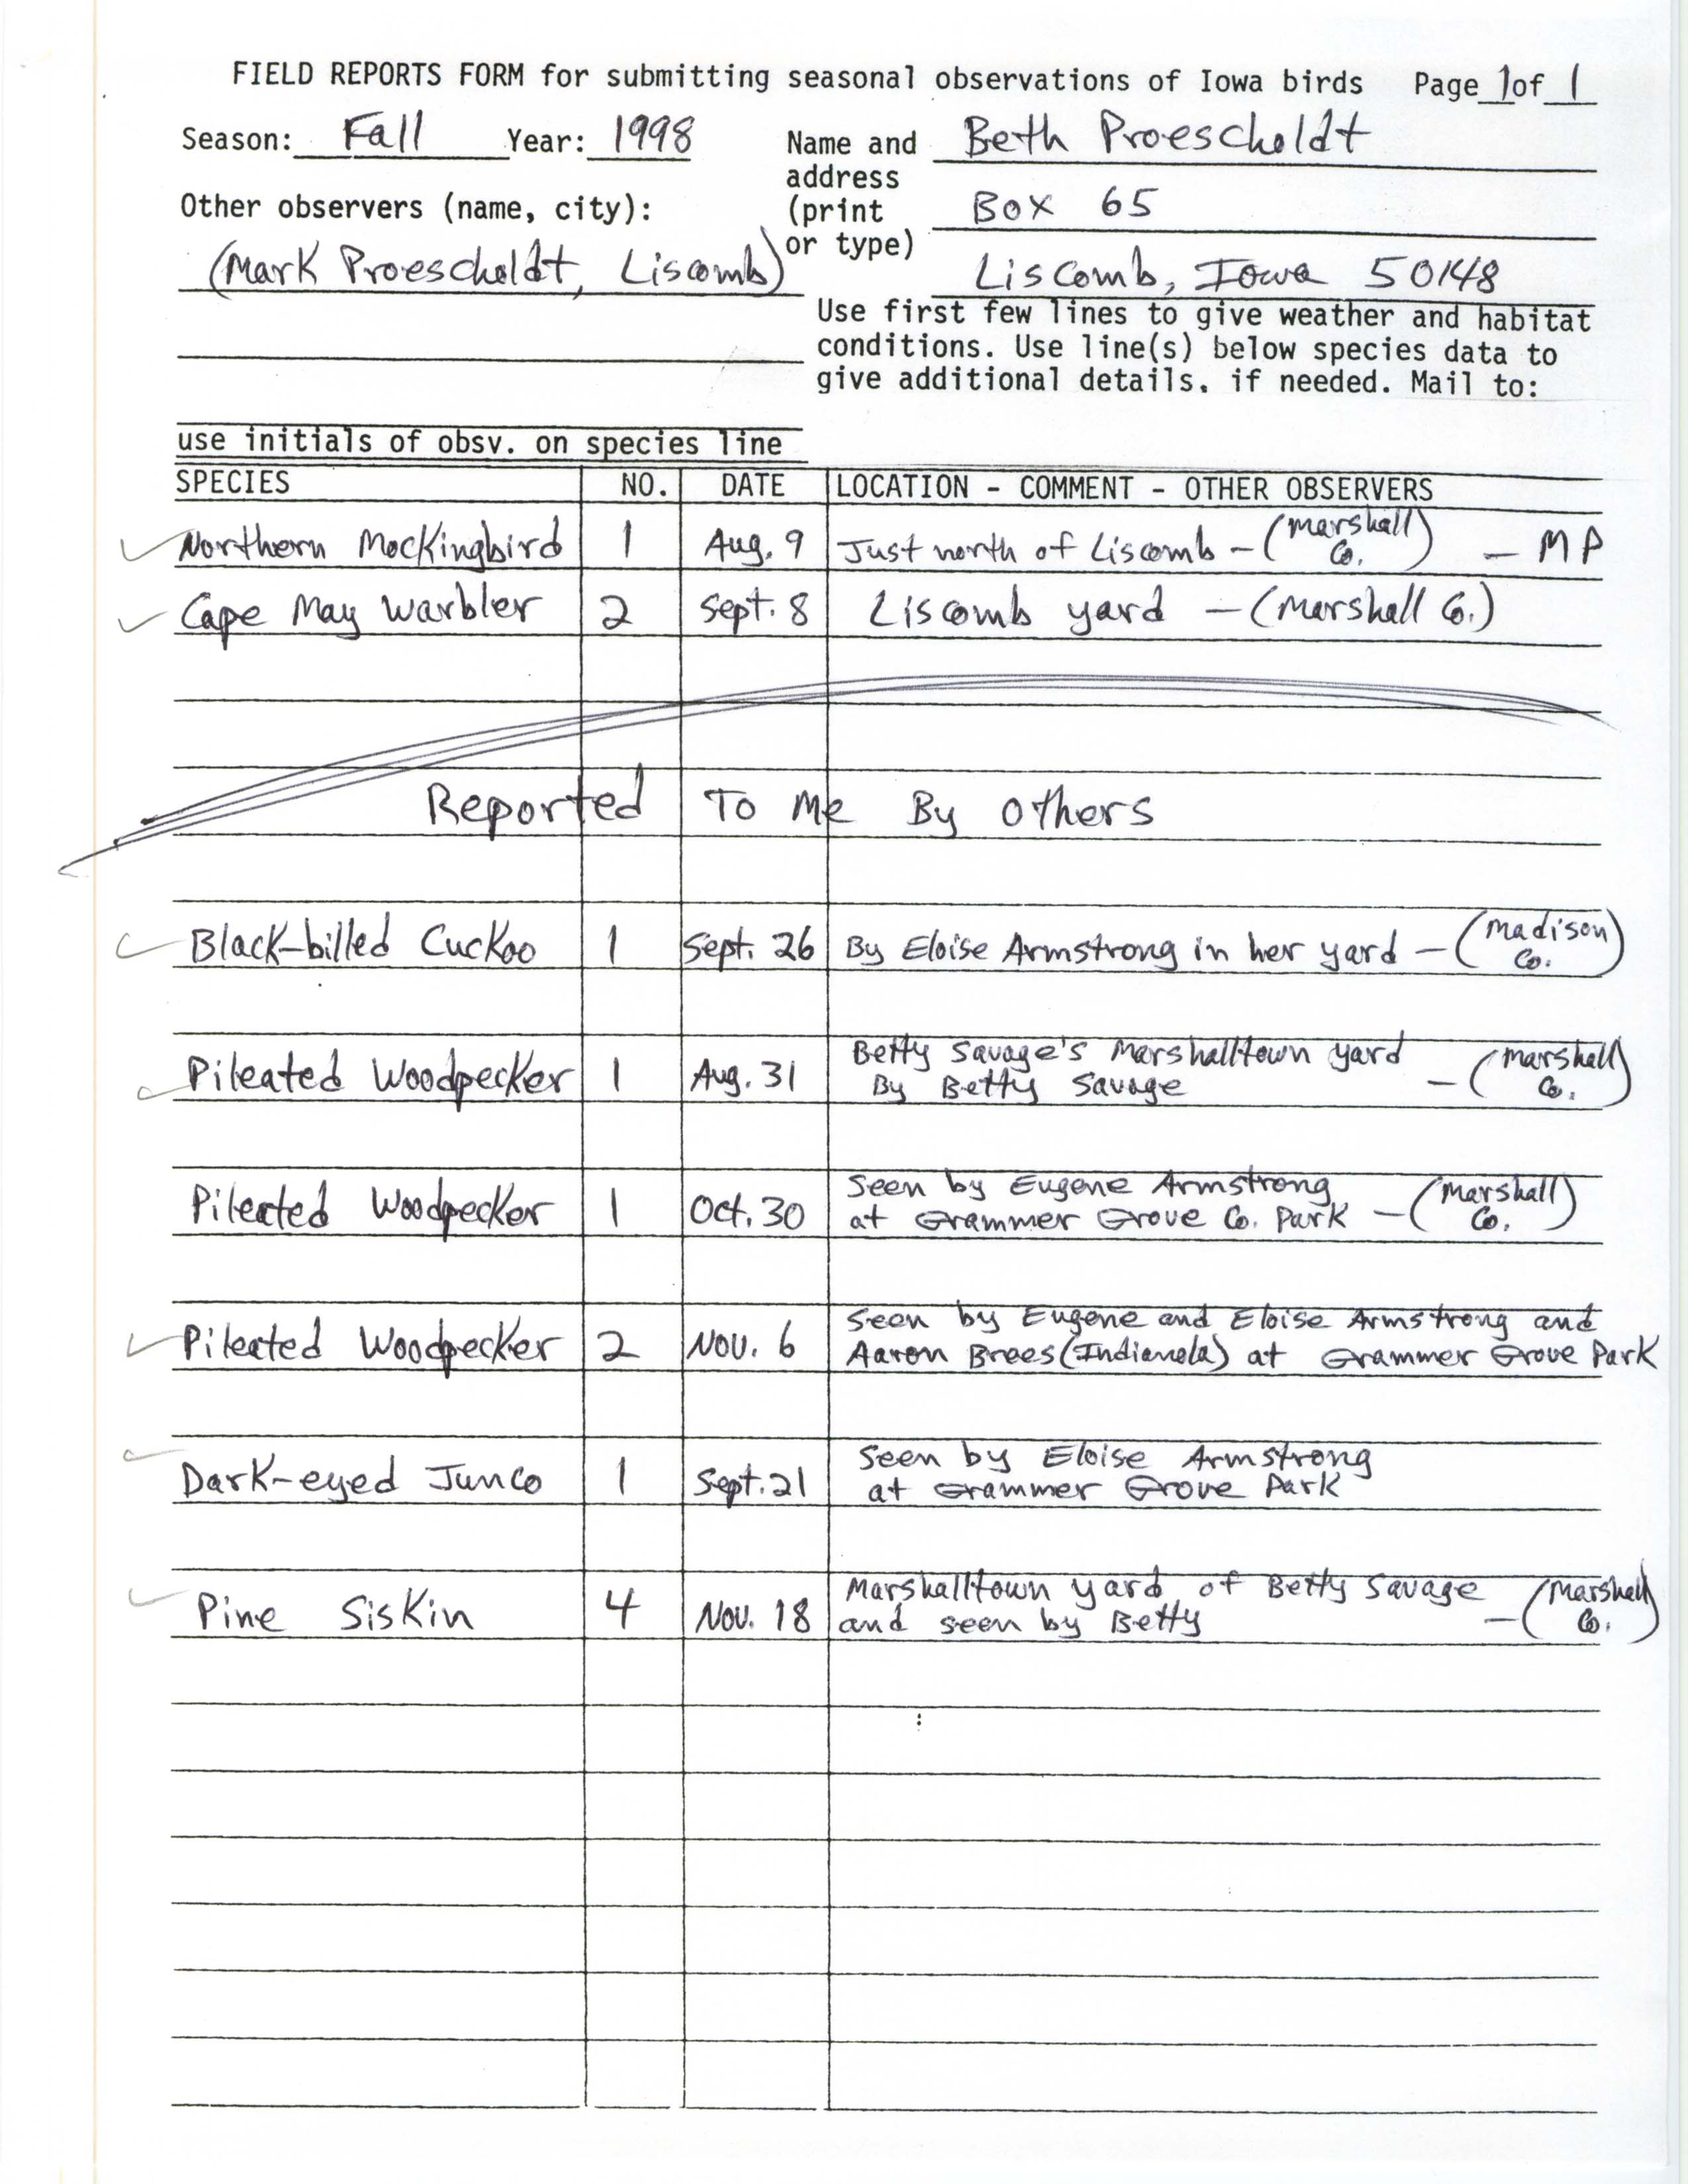 Field reports form for submitting seasonal observations of Iowa birds, Beth Proescholdt, fall 1998